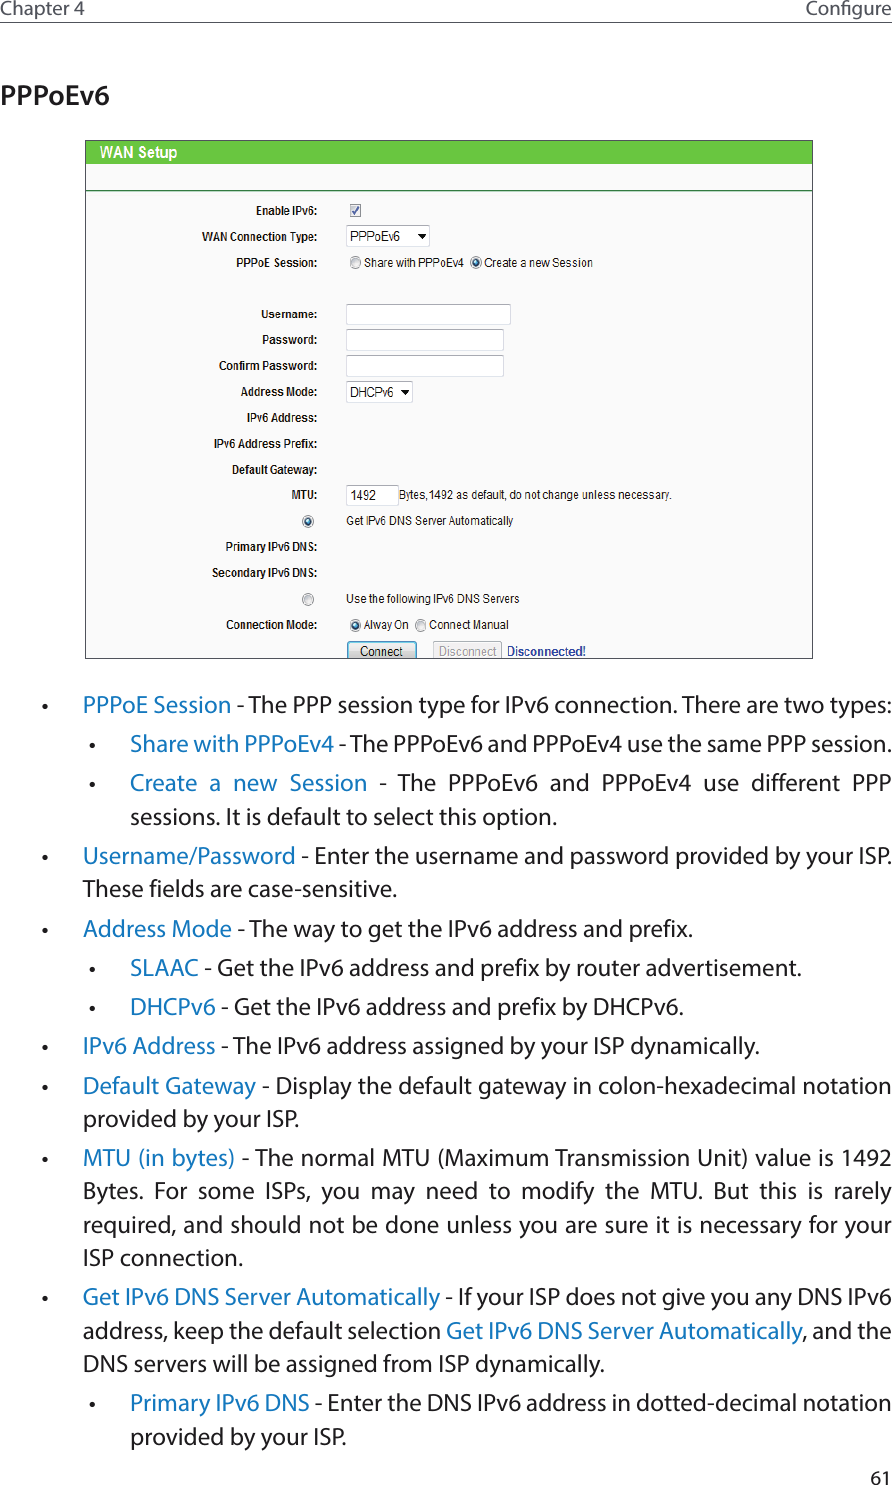 61Chapter 4 CongurePPPoEv6 •  PPPoE Session - The PPP session type for IPv6 connection. There are two types:•  Share with PPPoEv4 - The PPPoEv6 and PPPoEv4 use the same PPP session.•  Create a new Session - The PPPoEv6 and PPPoEv4 use different PPP sessions. It is default to select this option.•  Username/Password - Enter the username and password provided by your ISP. These fields are case-sensitive.•  Address Mode - The way to get the IPv6 address and prefix. •  SLAAC - Get the IPv6 address and prefix by router advertisement. •  DHCPv6 - Get the IPv6 address and prefix by DHCPv6. •  IPv6 Address - The IPv6 address assigned by your ISP dynamically.•  Default Gateway - Display the default gateway in colon-hexadecimal notation provided by your ISP.•  MTU (in bytes) - The normal MTU (Maximum Transmission Unit) value is 1492 Bytes. For some ISPs, you may need to modify the MTU. But this is rarely required, and should not be done unless you are sure it is necessary for your ISP connection.•  Get IPv6 DNS Server Automatically - If your ISP does not give you any DNS IPv6 address, keep the default selection Get IPv6 DNS Server Automatically, and the DNS servers will be assigned from ISP dynamically.•  Primary IPv6 DNS - Enter the DNS IPv6 address in dotted-decimal notation provided by your ISP.